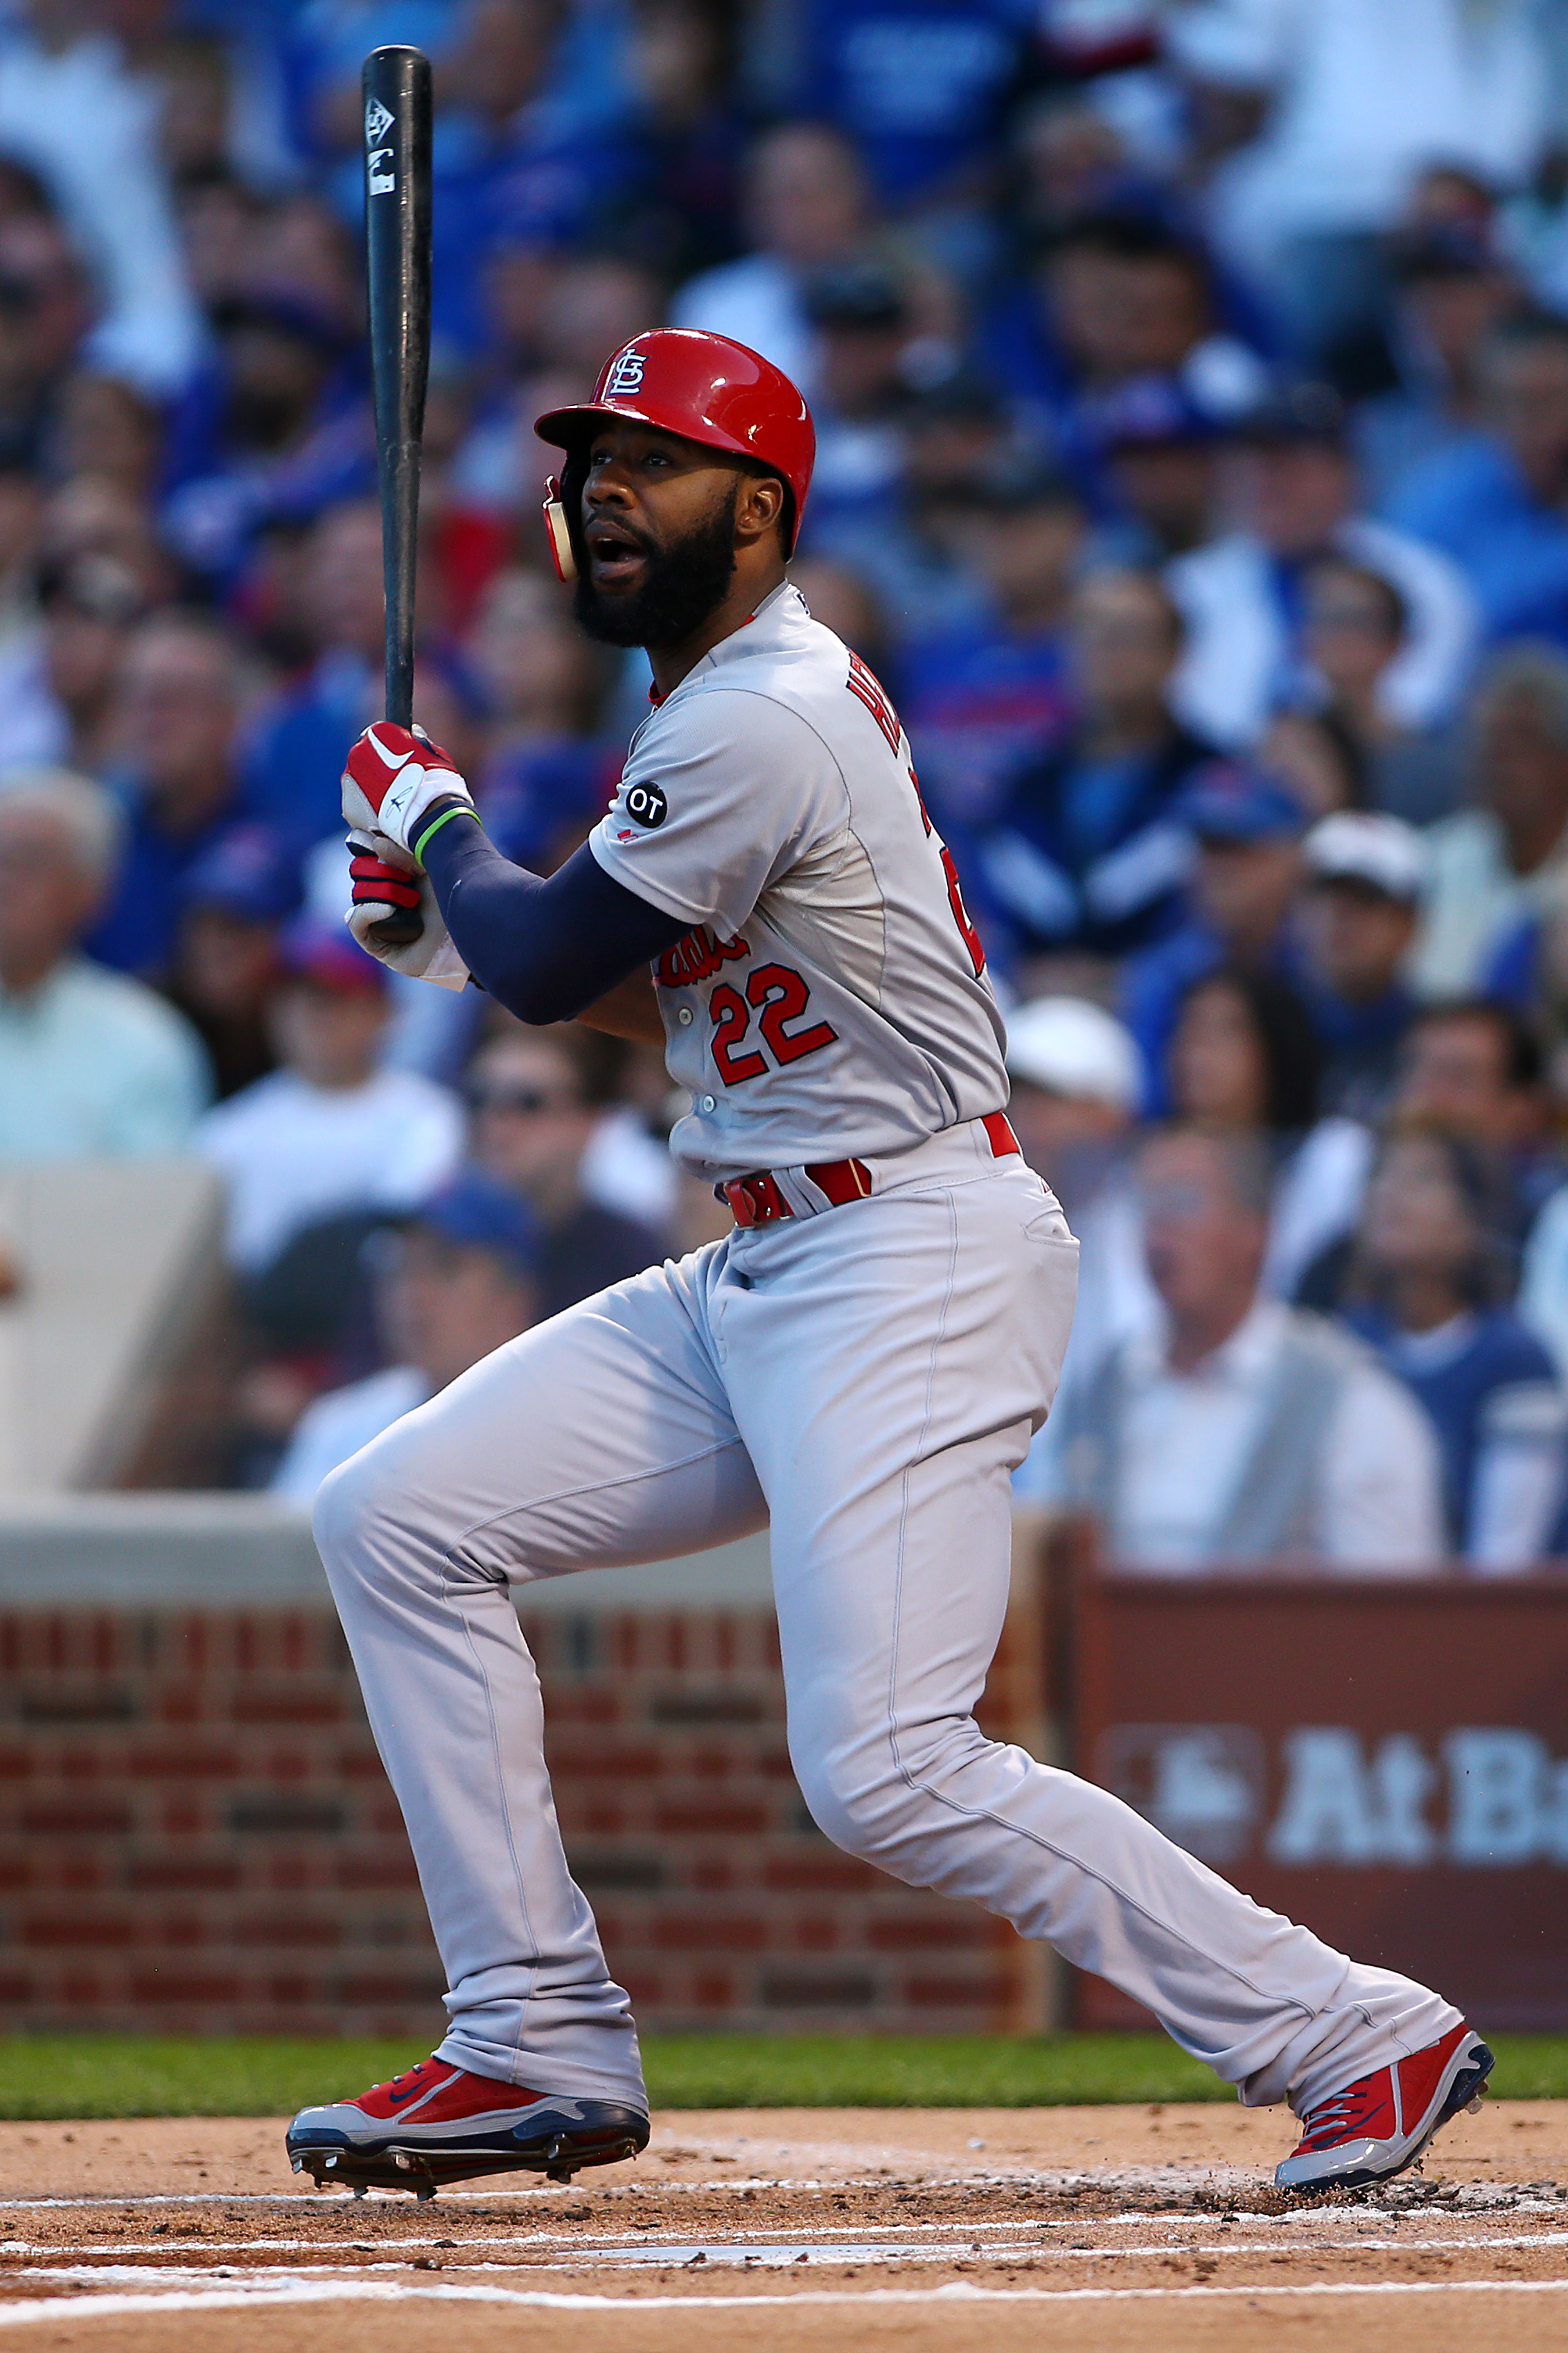 Jason Heyward remains the best option for the Cardinals